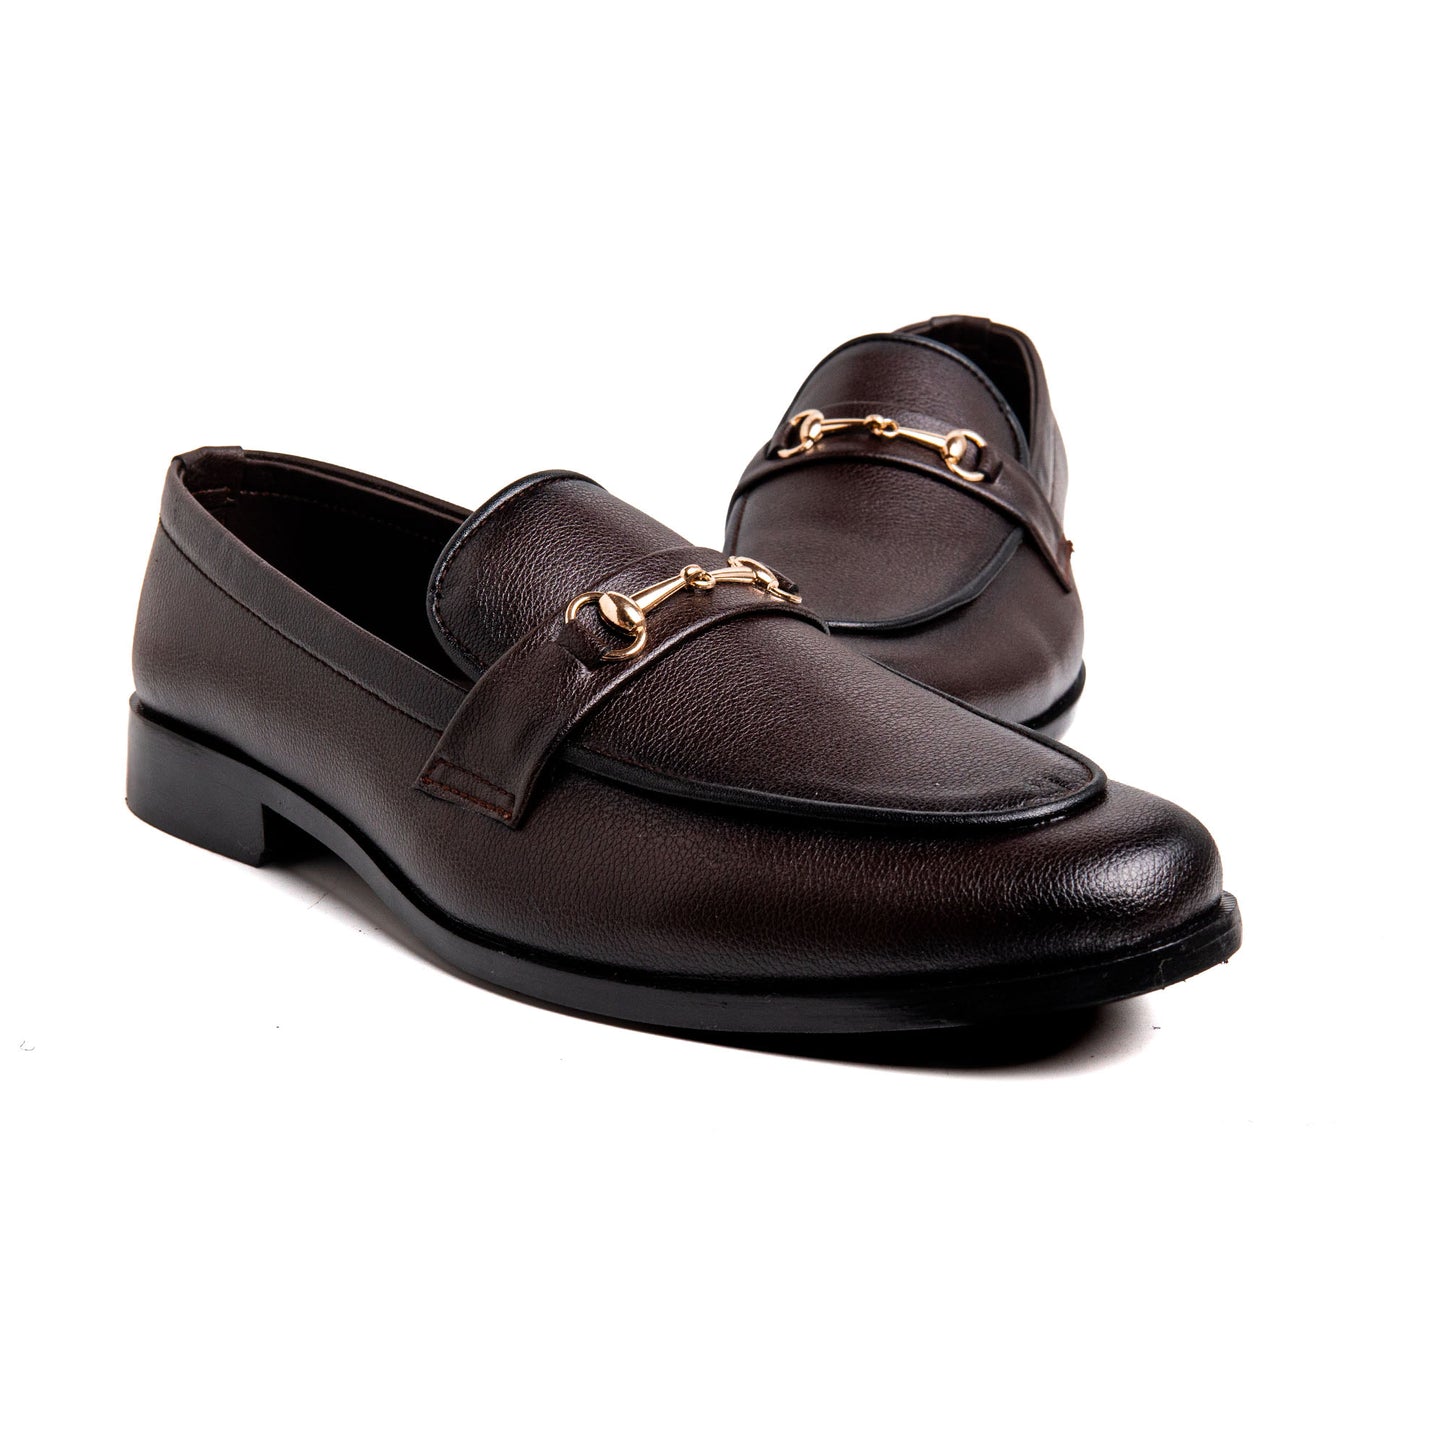 Men Brown Buckled Imported PU Leather Shoes